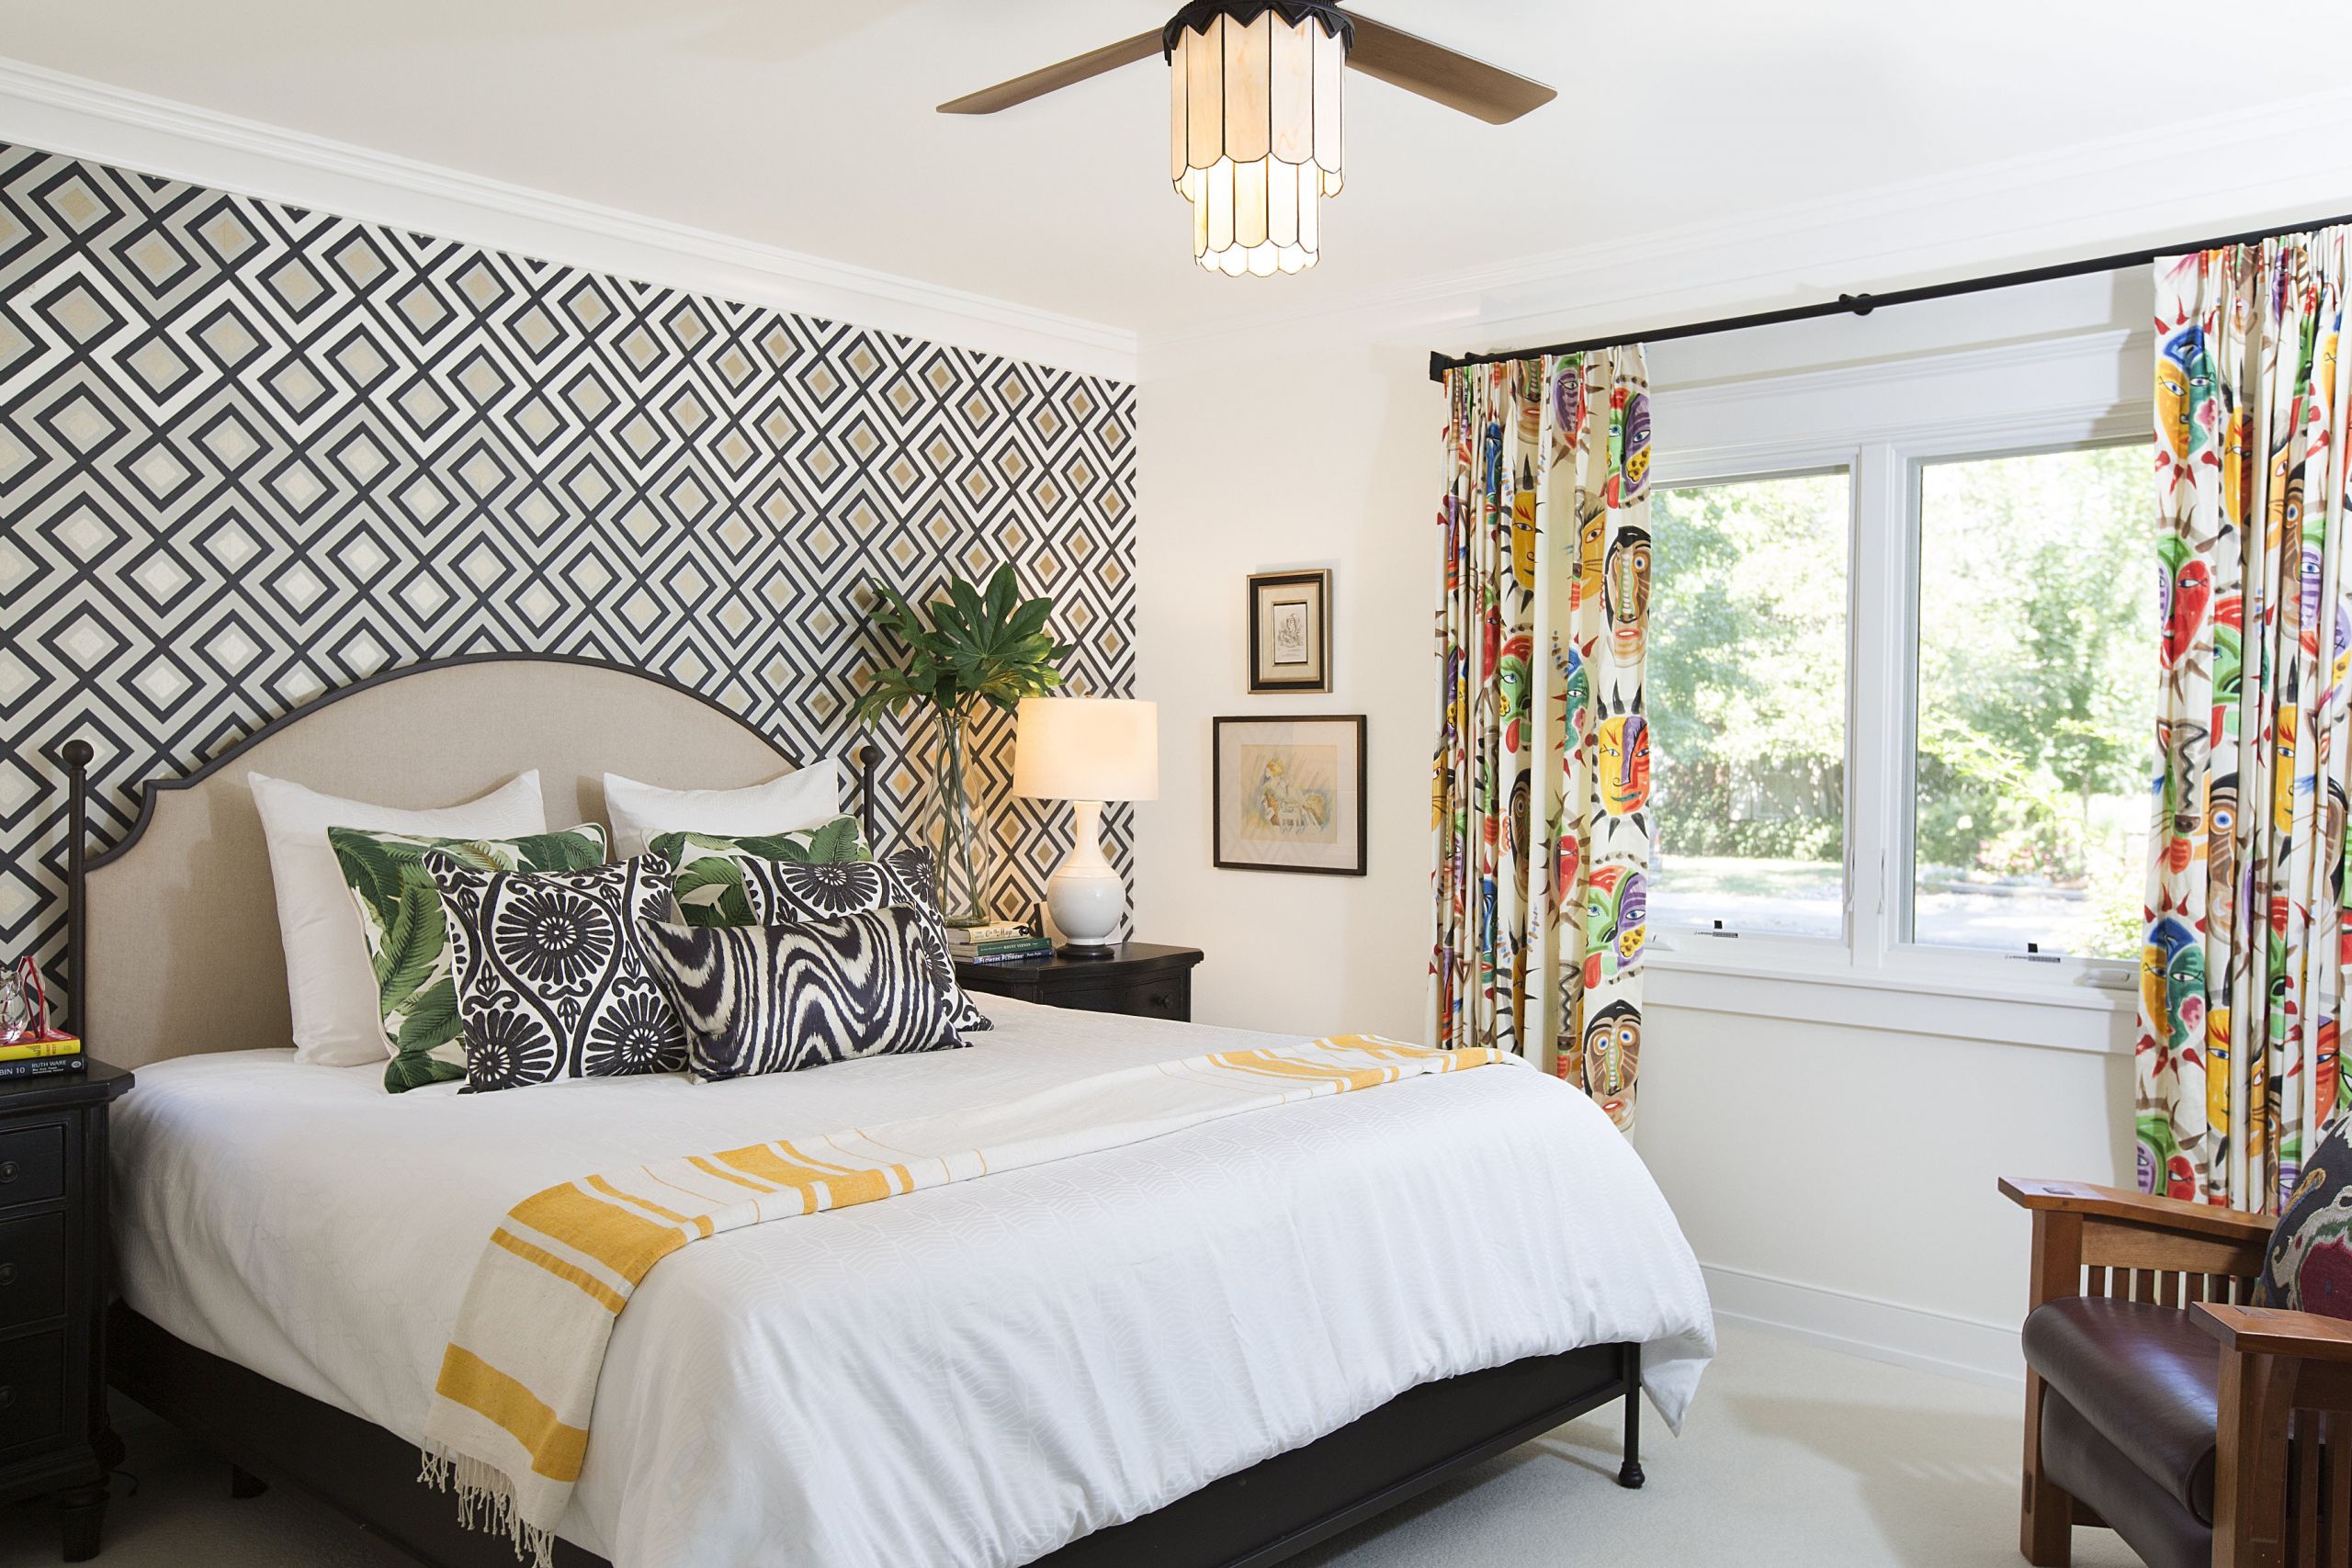 Wallpaper Accent Wall Bedroom
 Accent wall with geometric wallpaper and colorful drapery